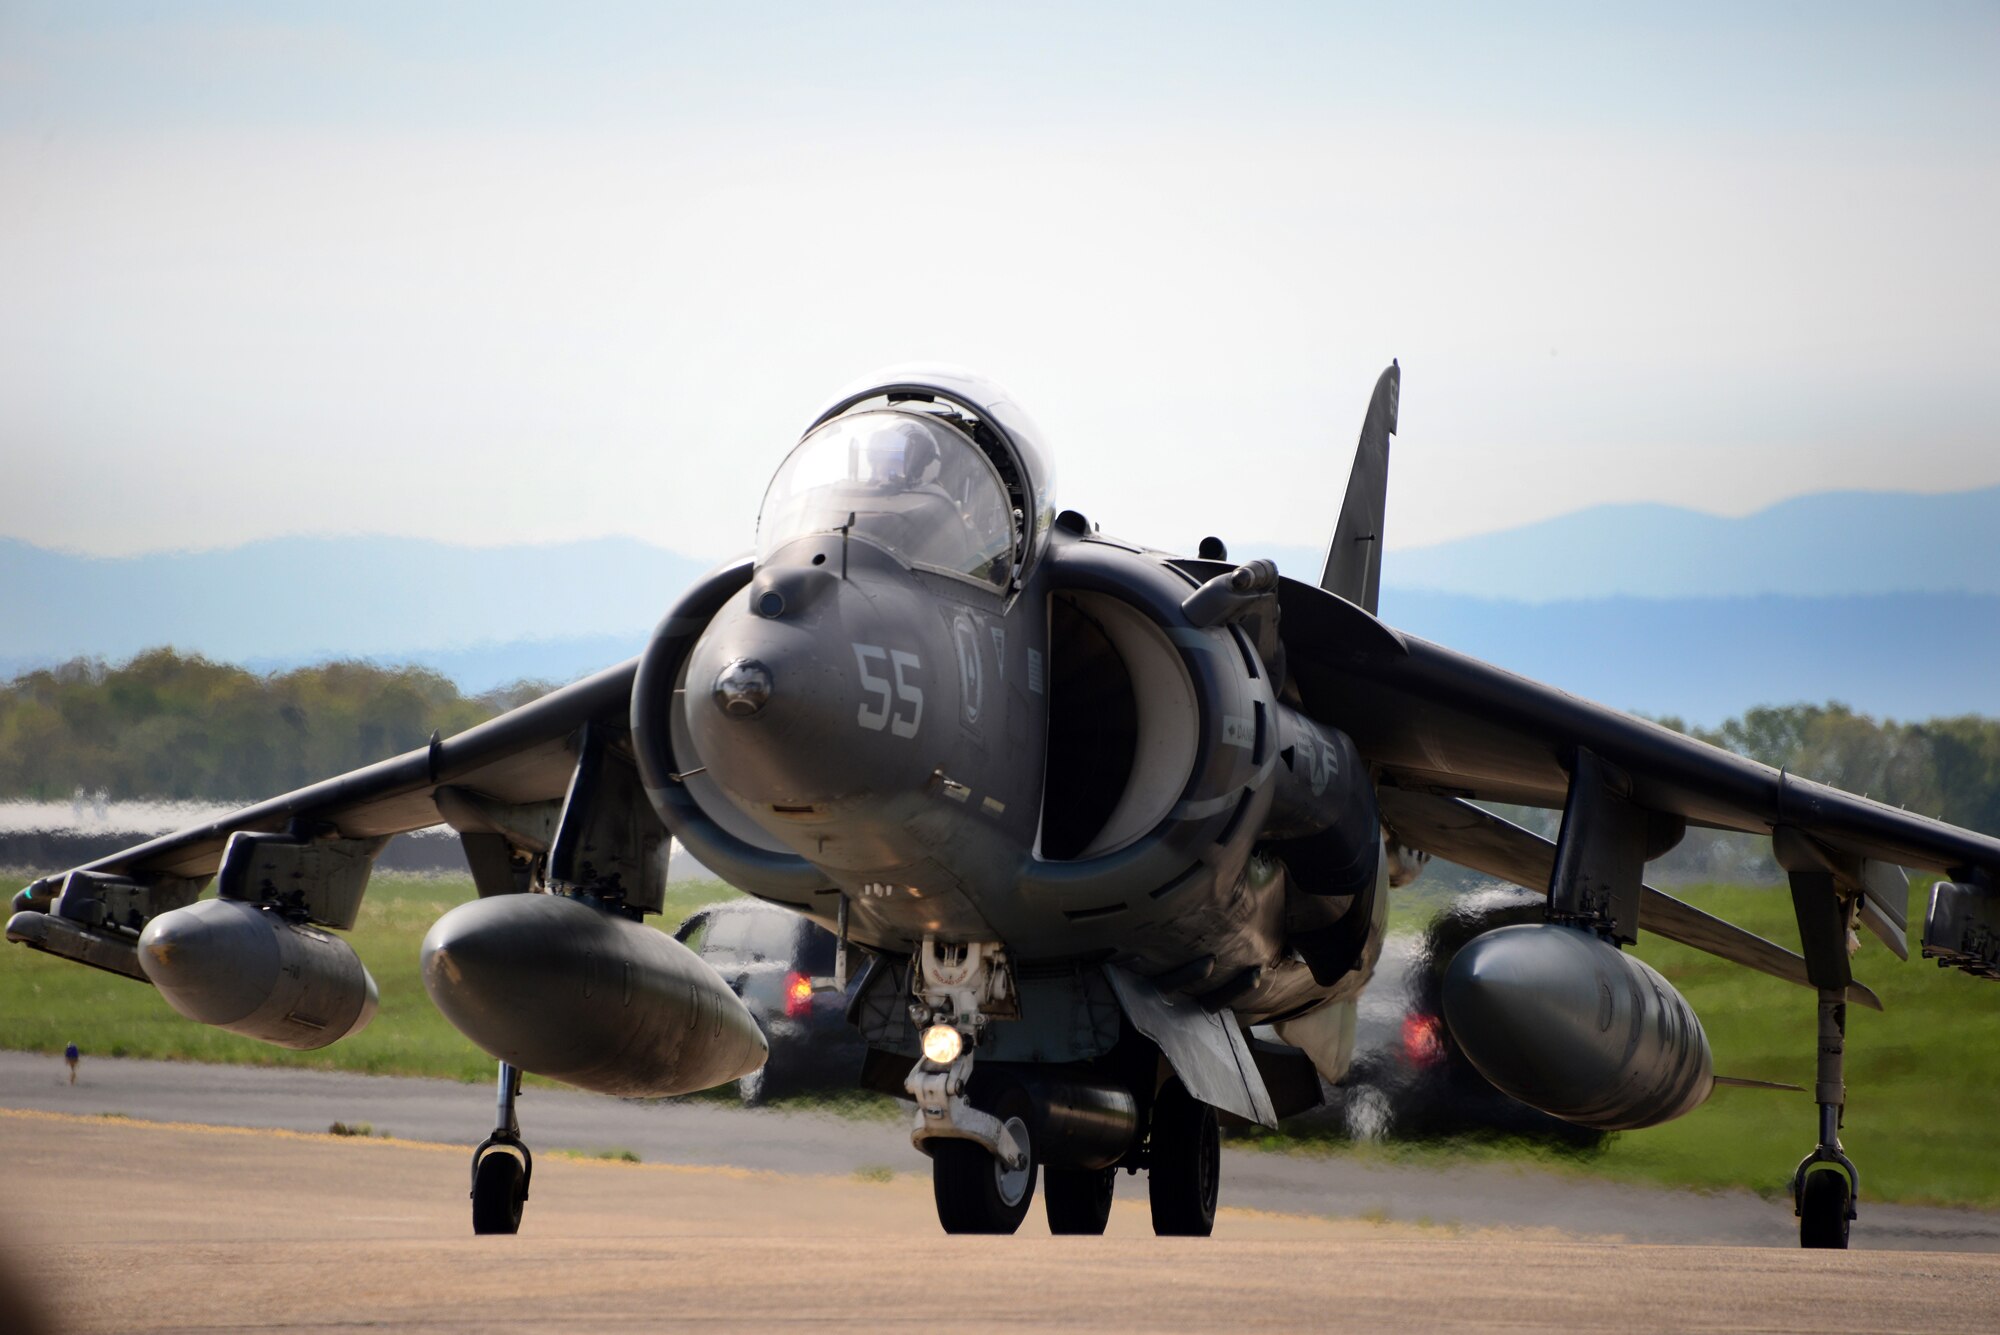 A Harrier II fighter aircraft taxies at the 2016 Smoky Mountain Air Show in Knoxville, Tennessee. (U.S. Air National Guard photo by Master Sgt. Kendra M. Owenby, 134 ARW Public Affairs)